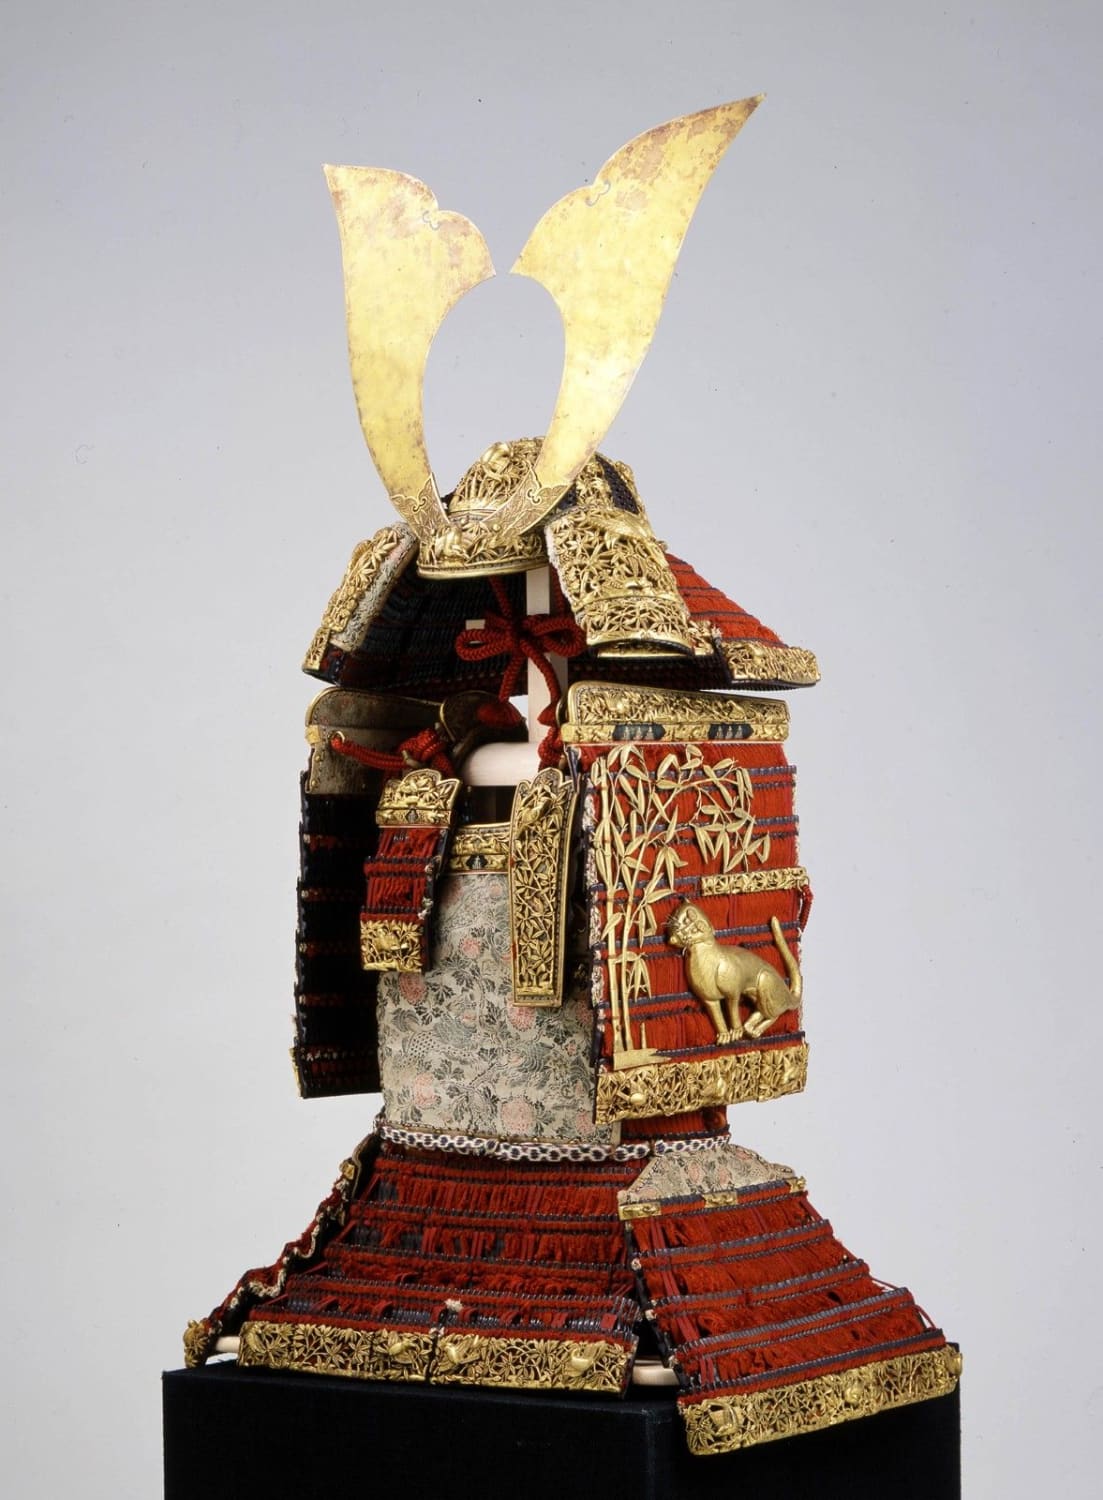 Armour laced with red threads with bamboo, tiger and sparrow motif, dedicated by Minamoto no Yoshitsune, one of Japan greatest samurai, to the Kasuga Taisha Shrine in Nara. Kamakura period, 12th century CE. The Armour is registered as a national treasure in Japan